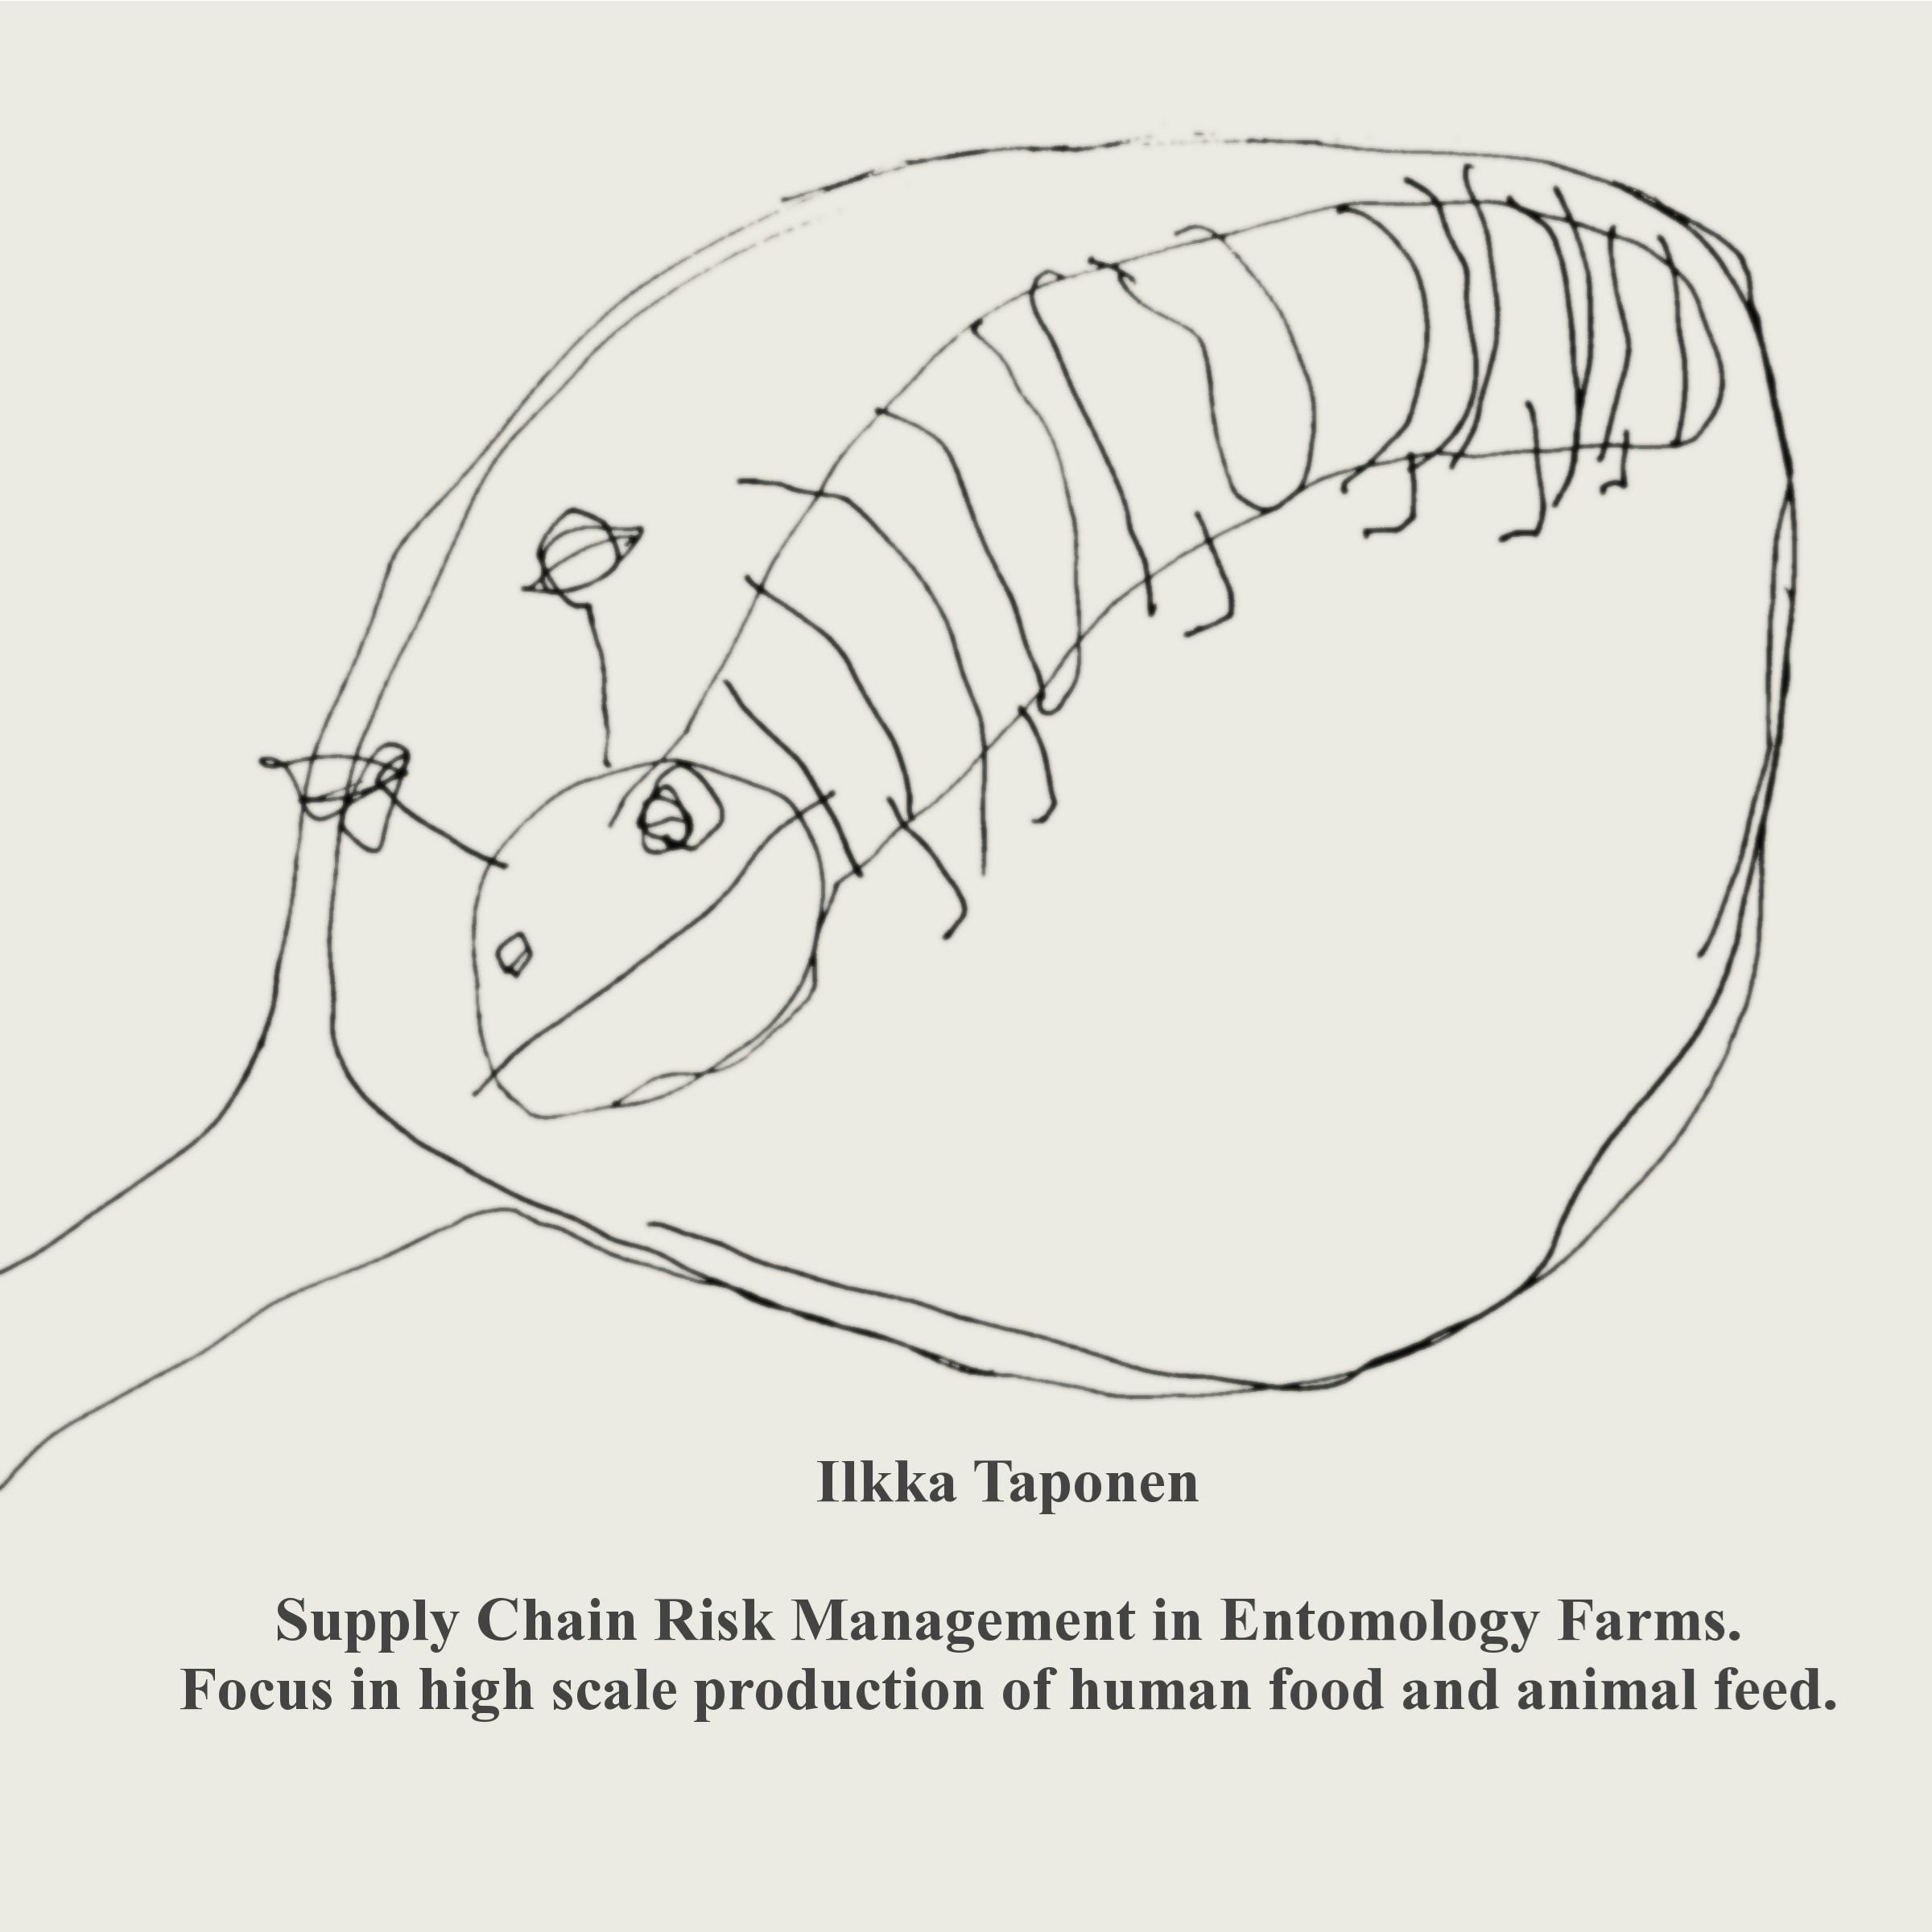 Supply Chain Risk Management in Entomology Farms Case: High Scale Production of Human Food and Animal Feed - Ilkka Taponen